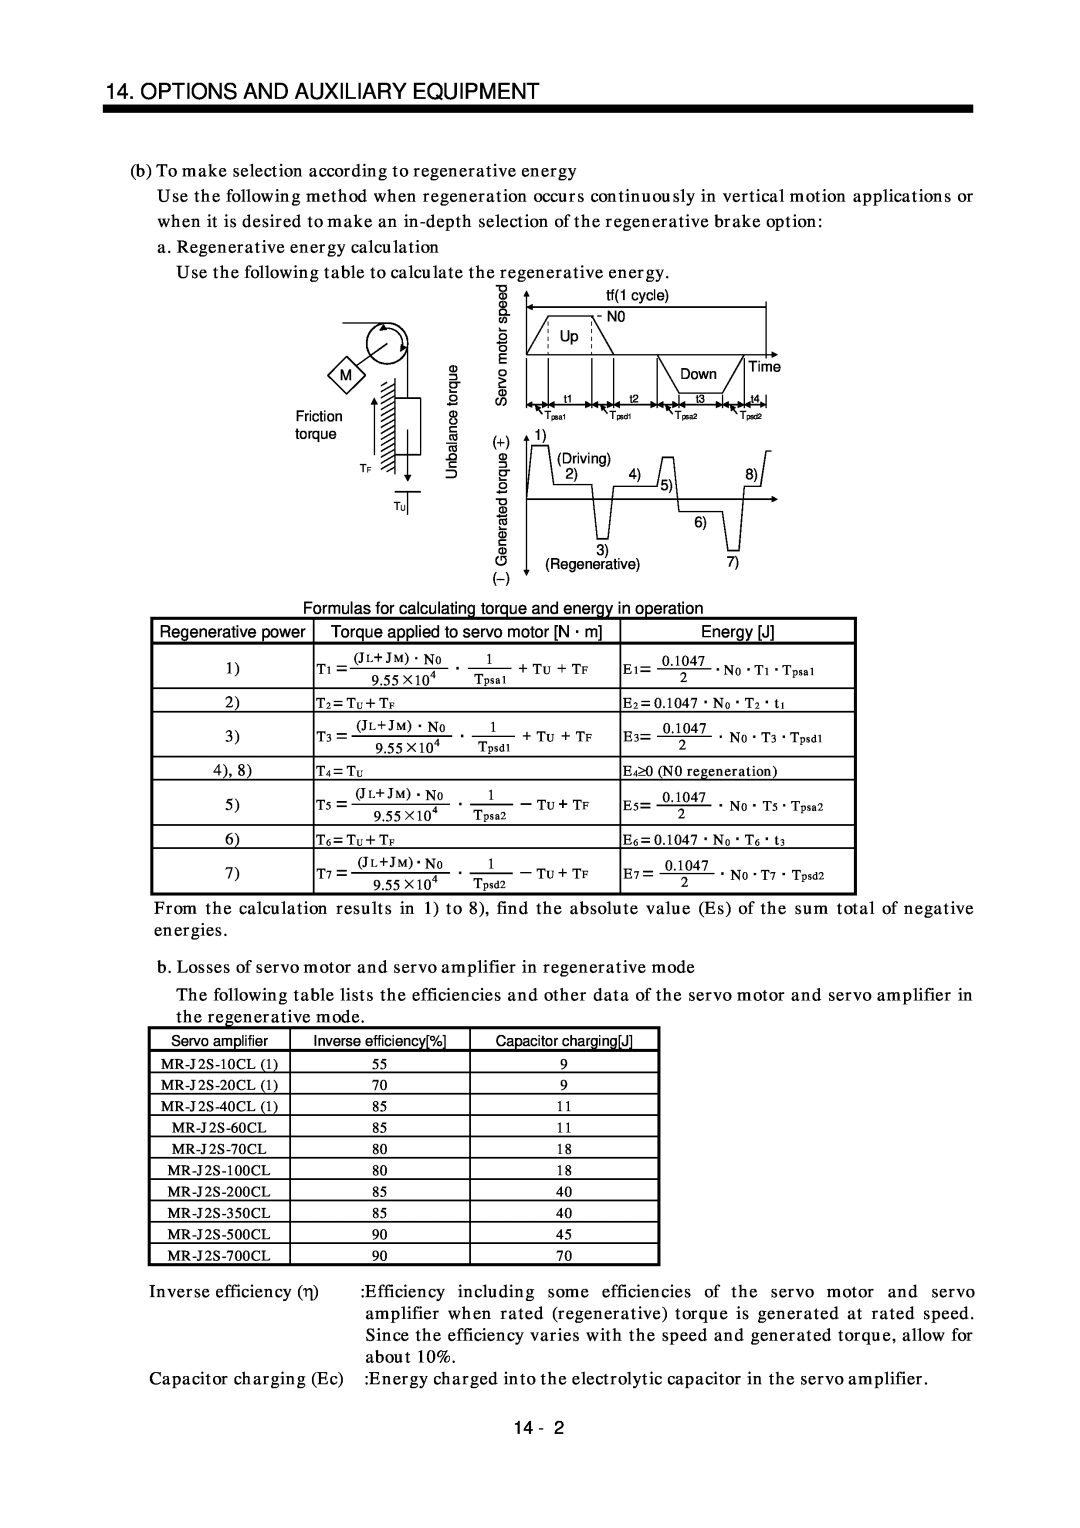 Mitsubishi Electronics MR-J2S- CL specifications Options And Auxiliary Equipment, a.Regenerative energy calculation 